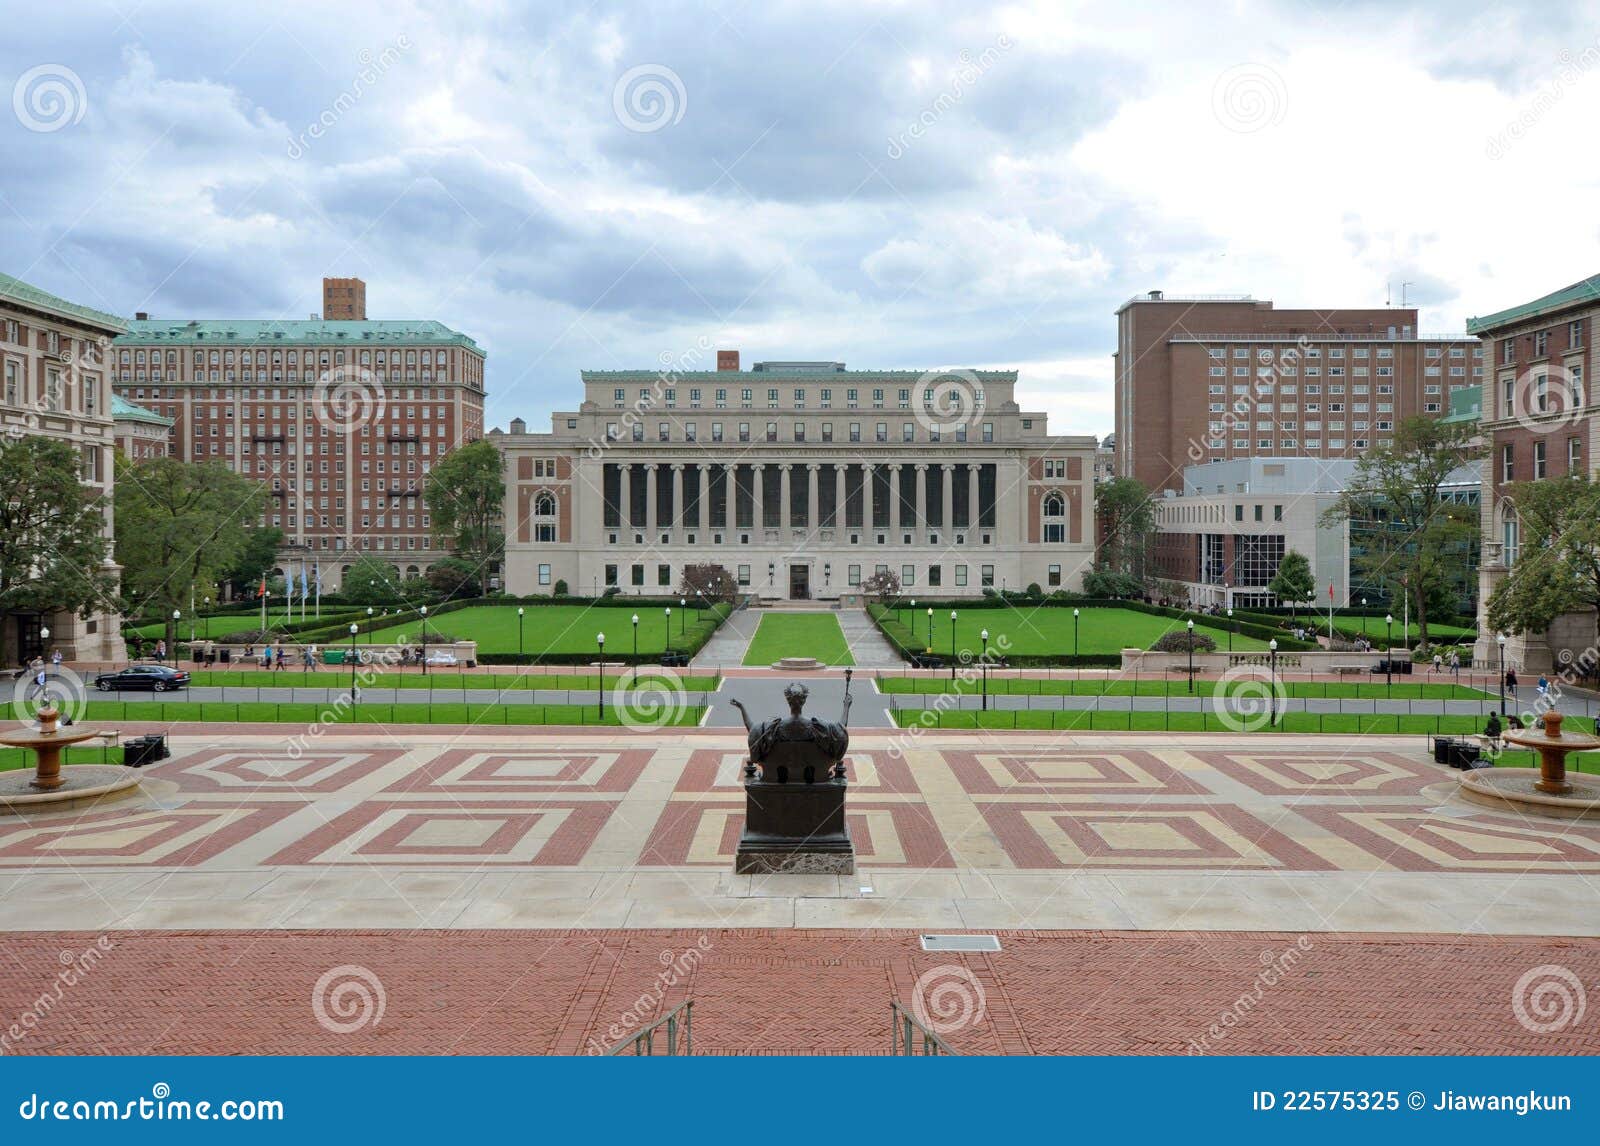 Vergil Columbia University Library Inscription Detail Stock Photo -  Download Image Now - iStock